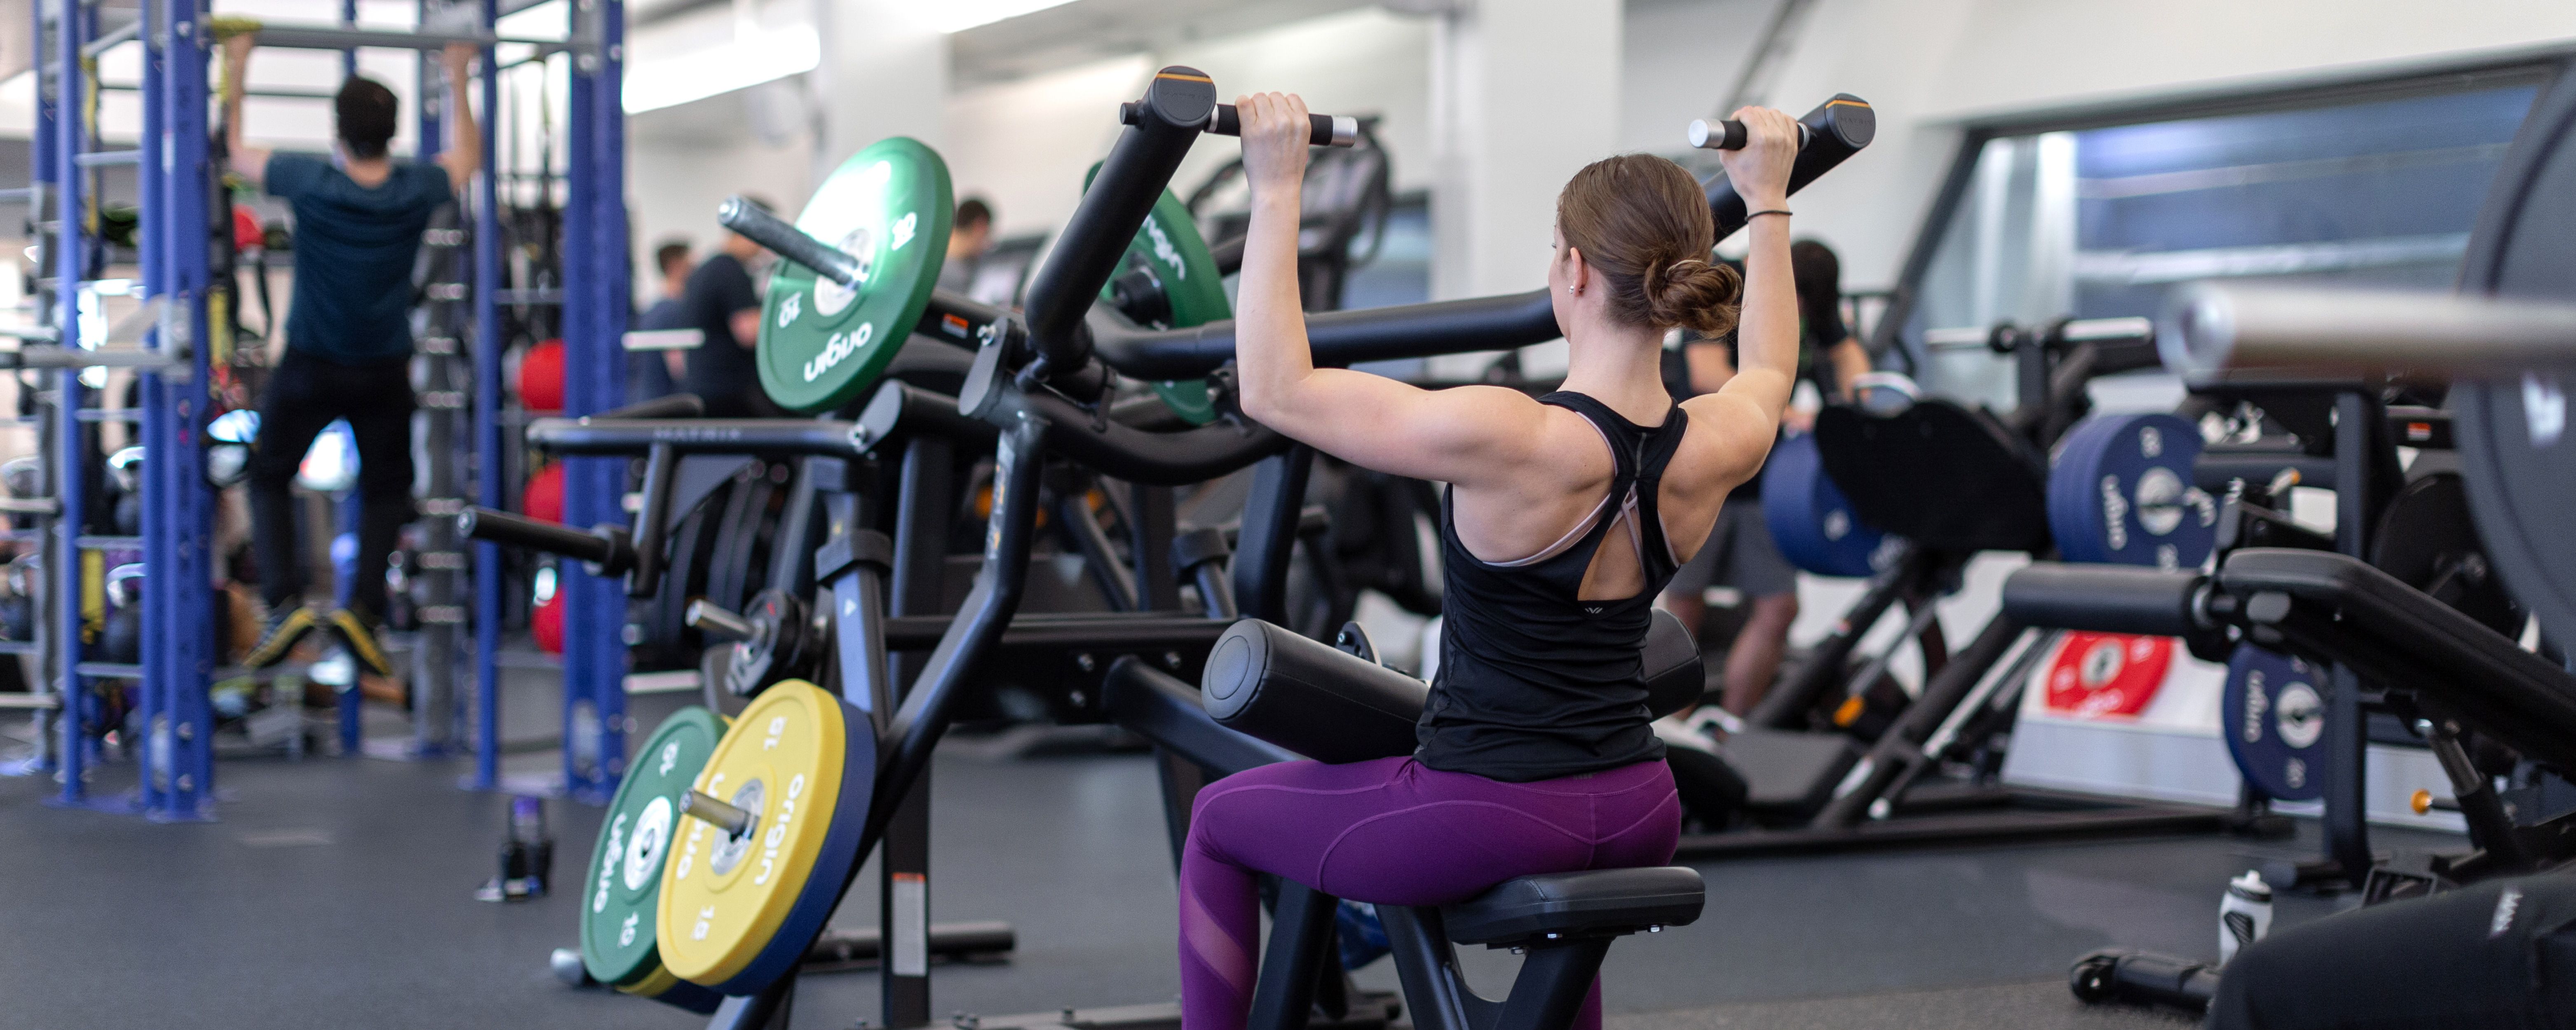 Woman lifting weights at Ethos gym